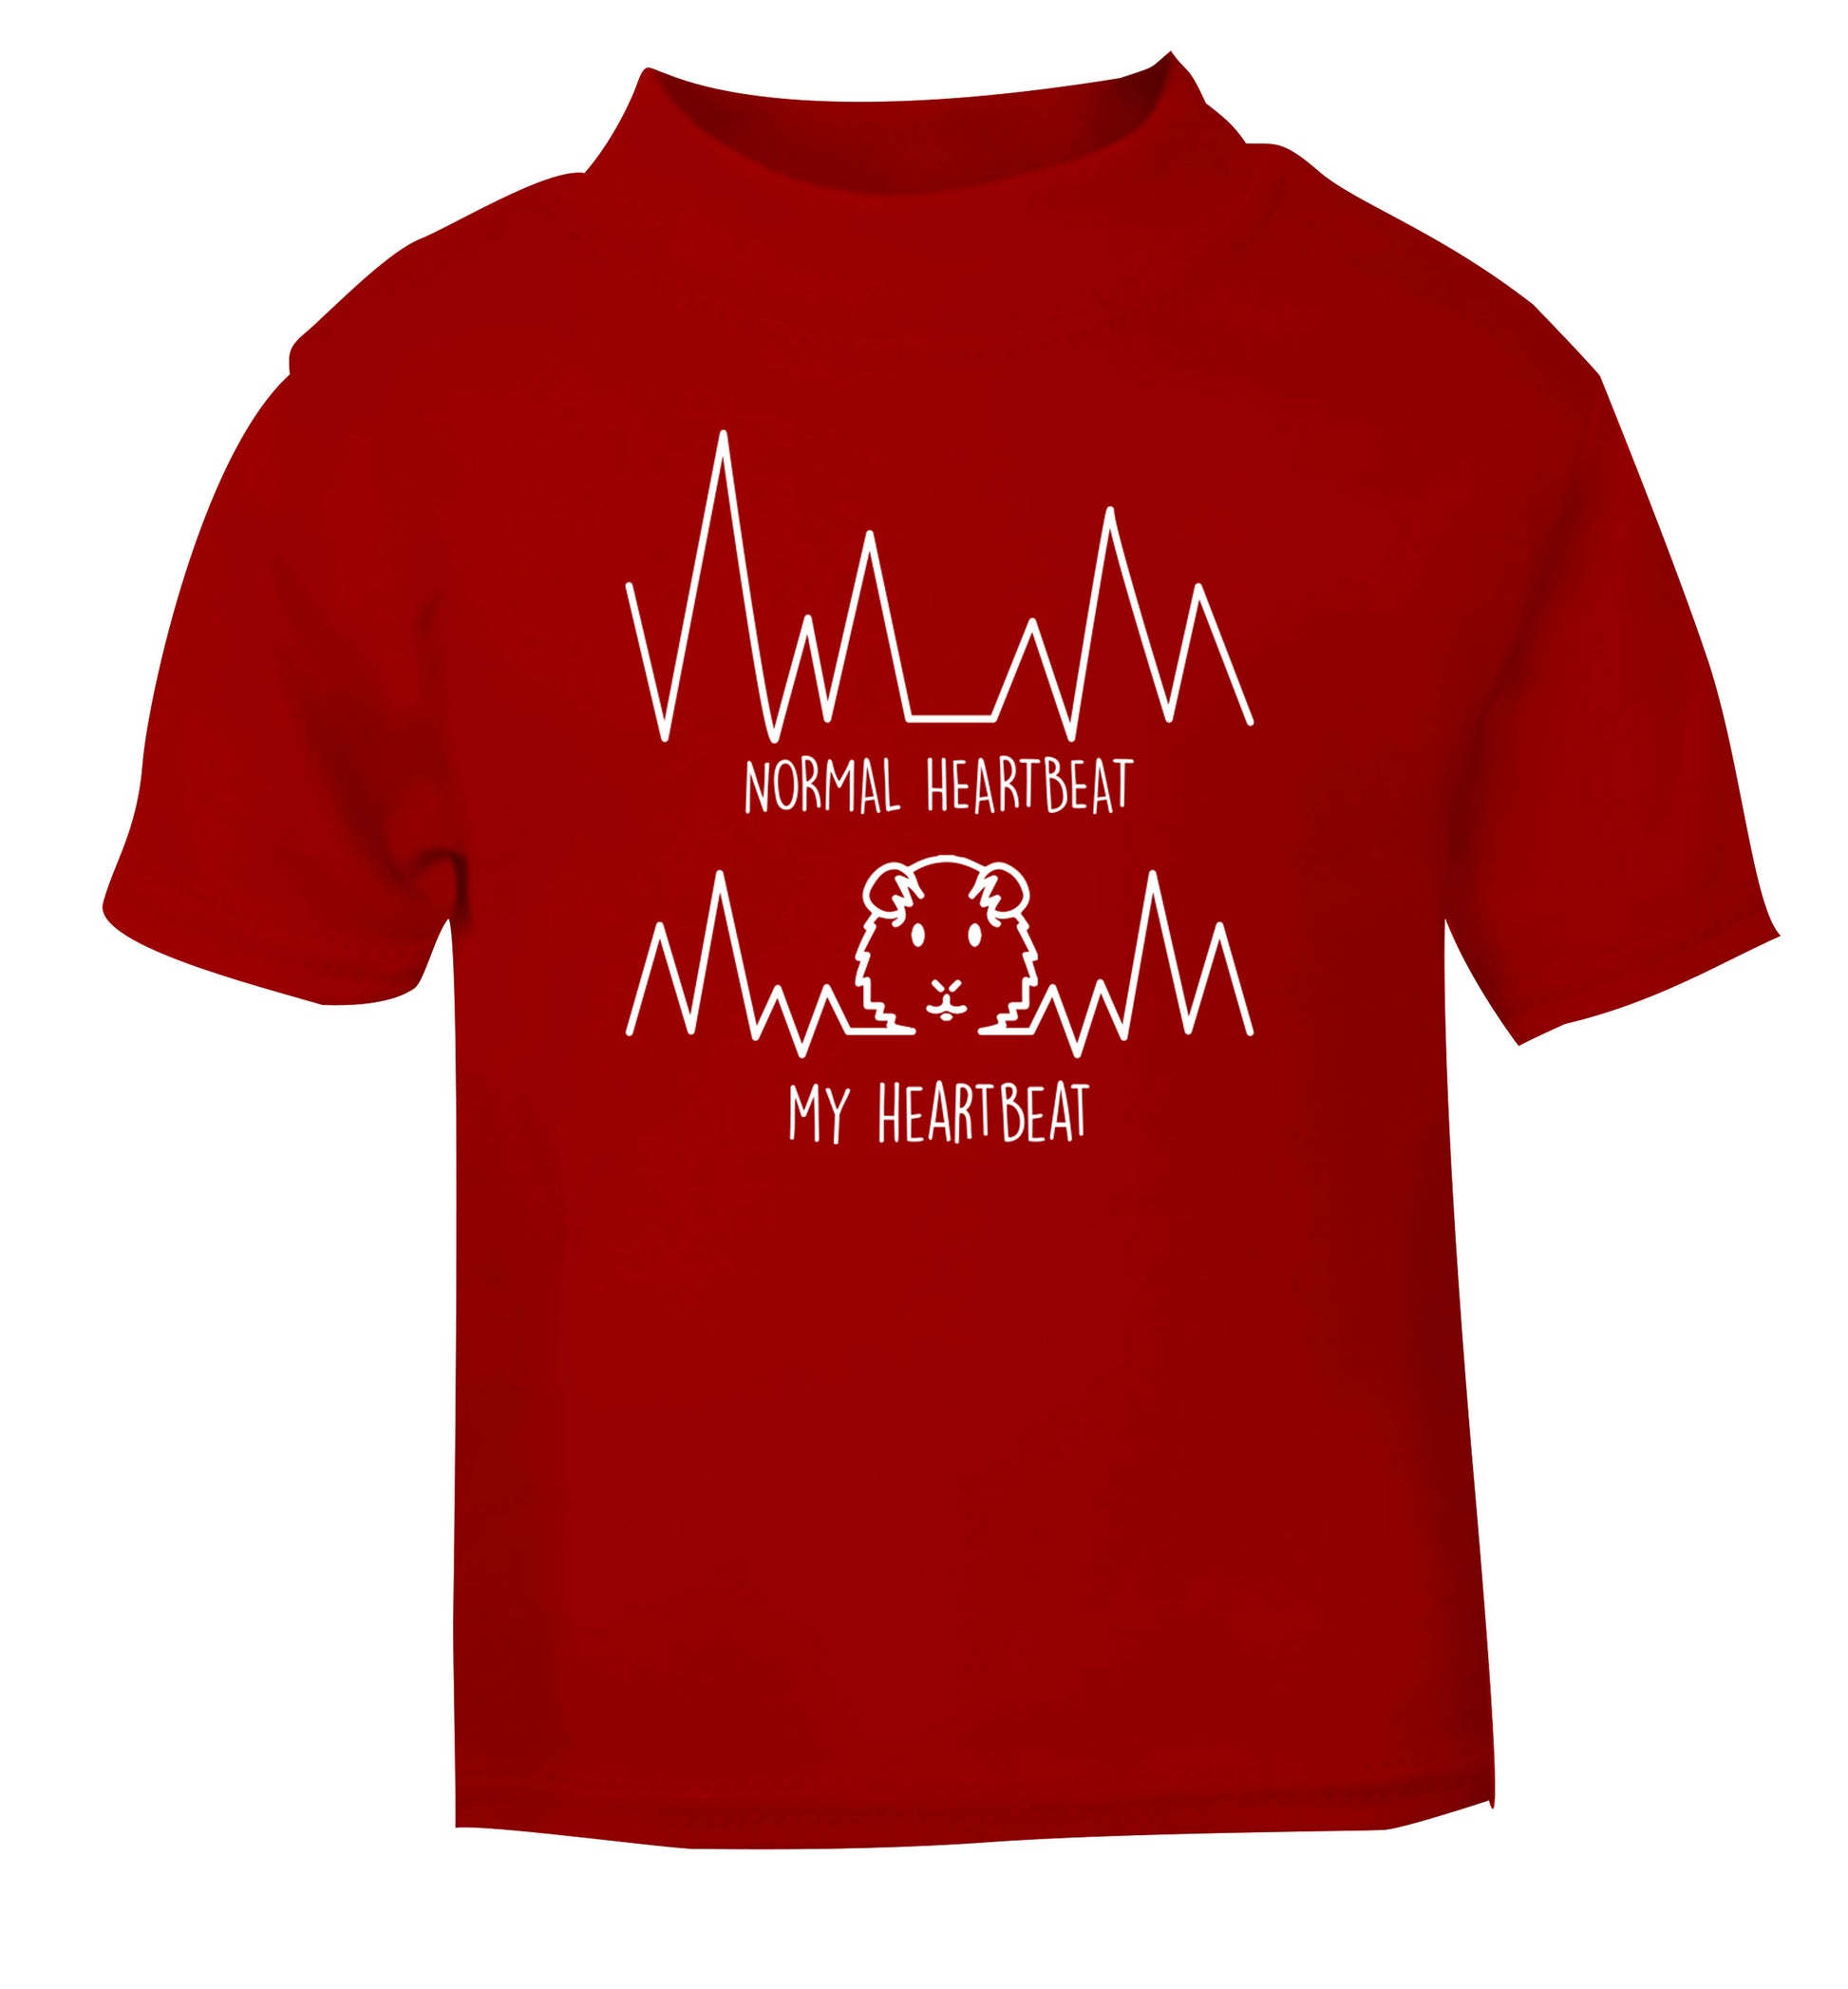 Normal heartbeat vs my heartbeat guinea pig lover red Baby Toddler Tshirt 2 Years